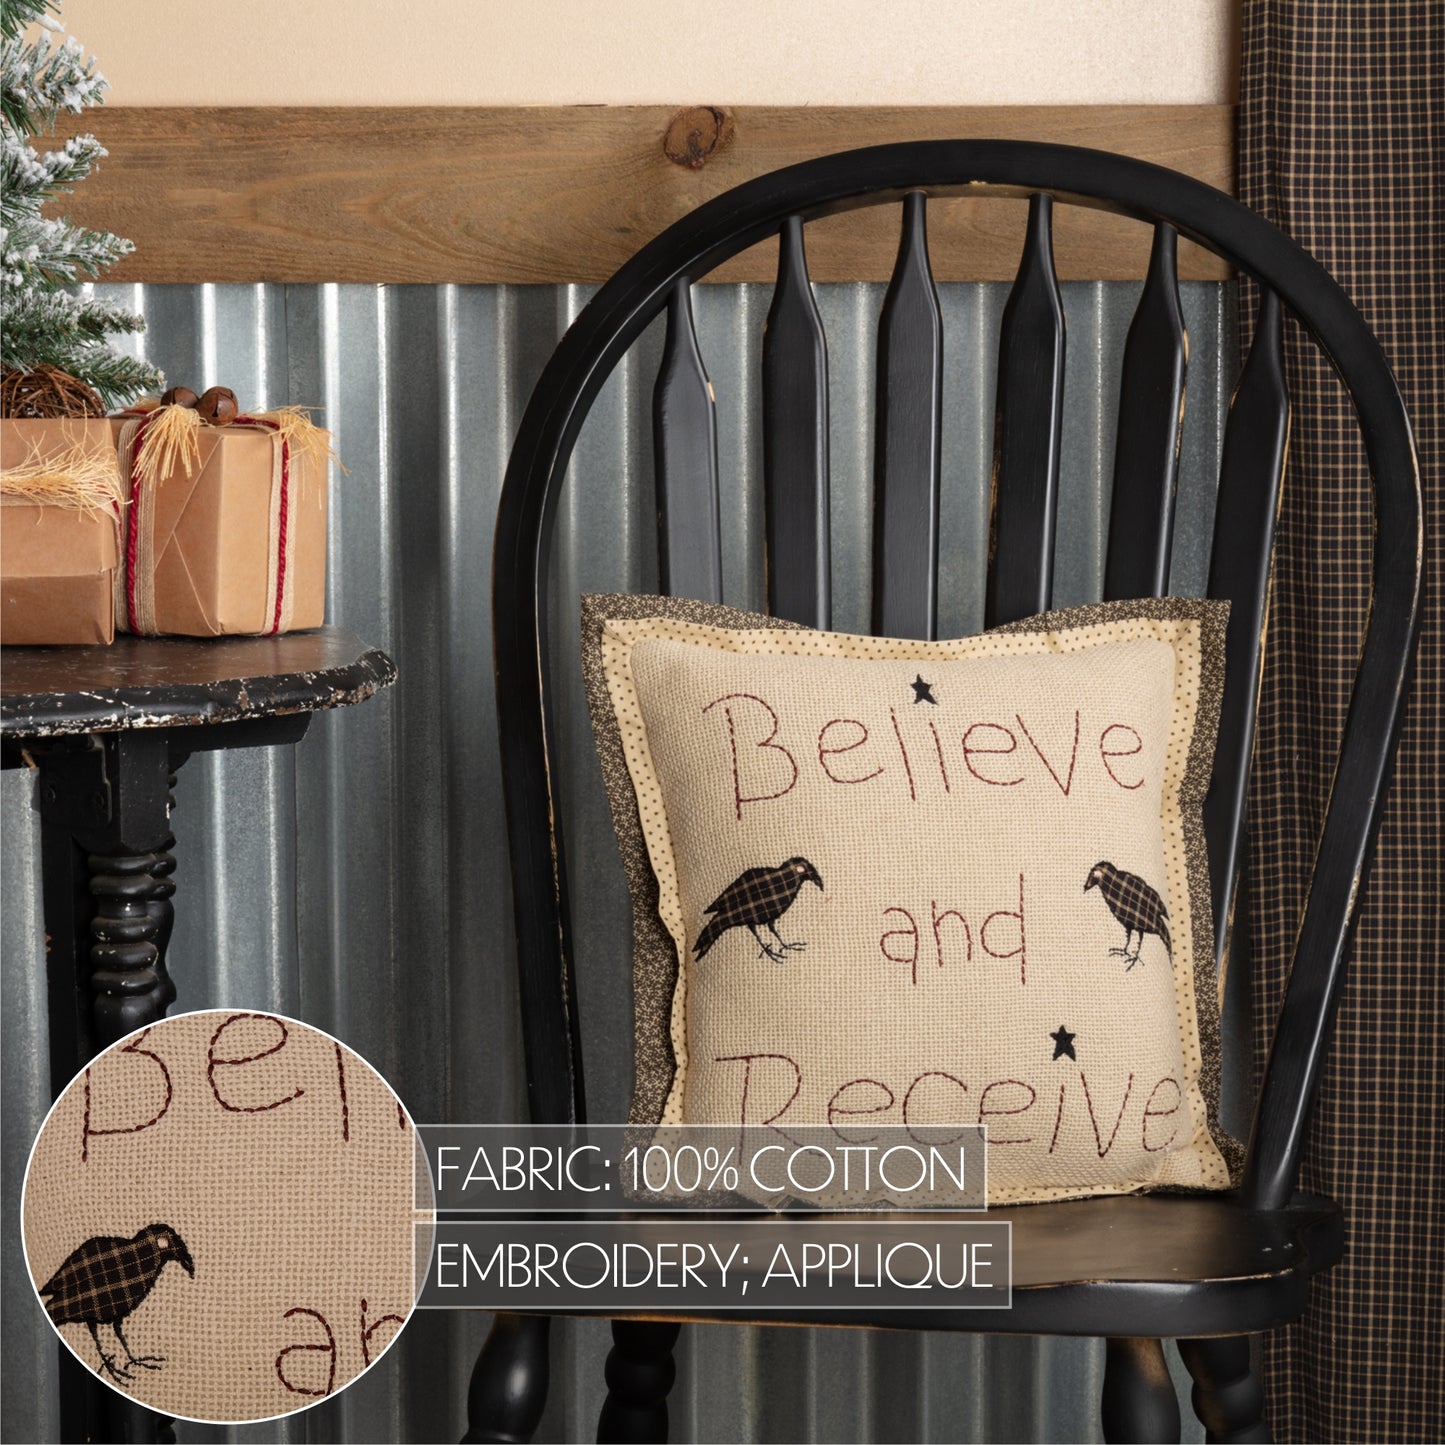 54618-Kettle-Grove-Believe-and-Receive-Pillow-12x12-image-2